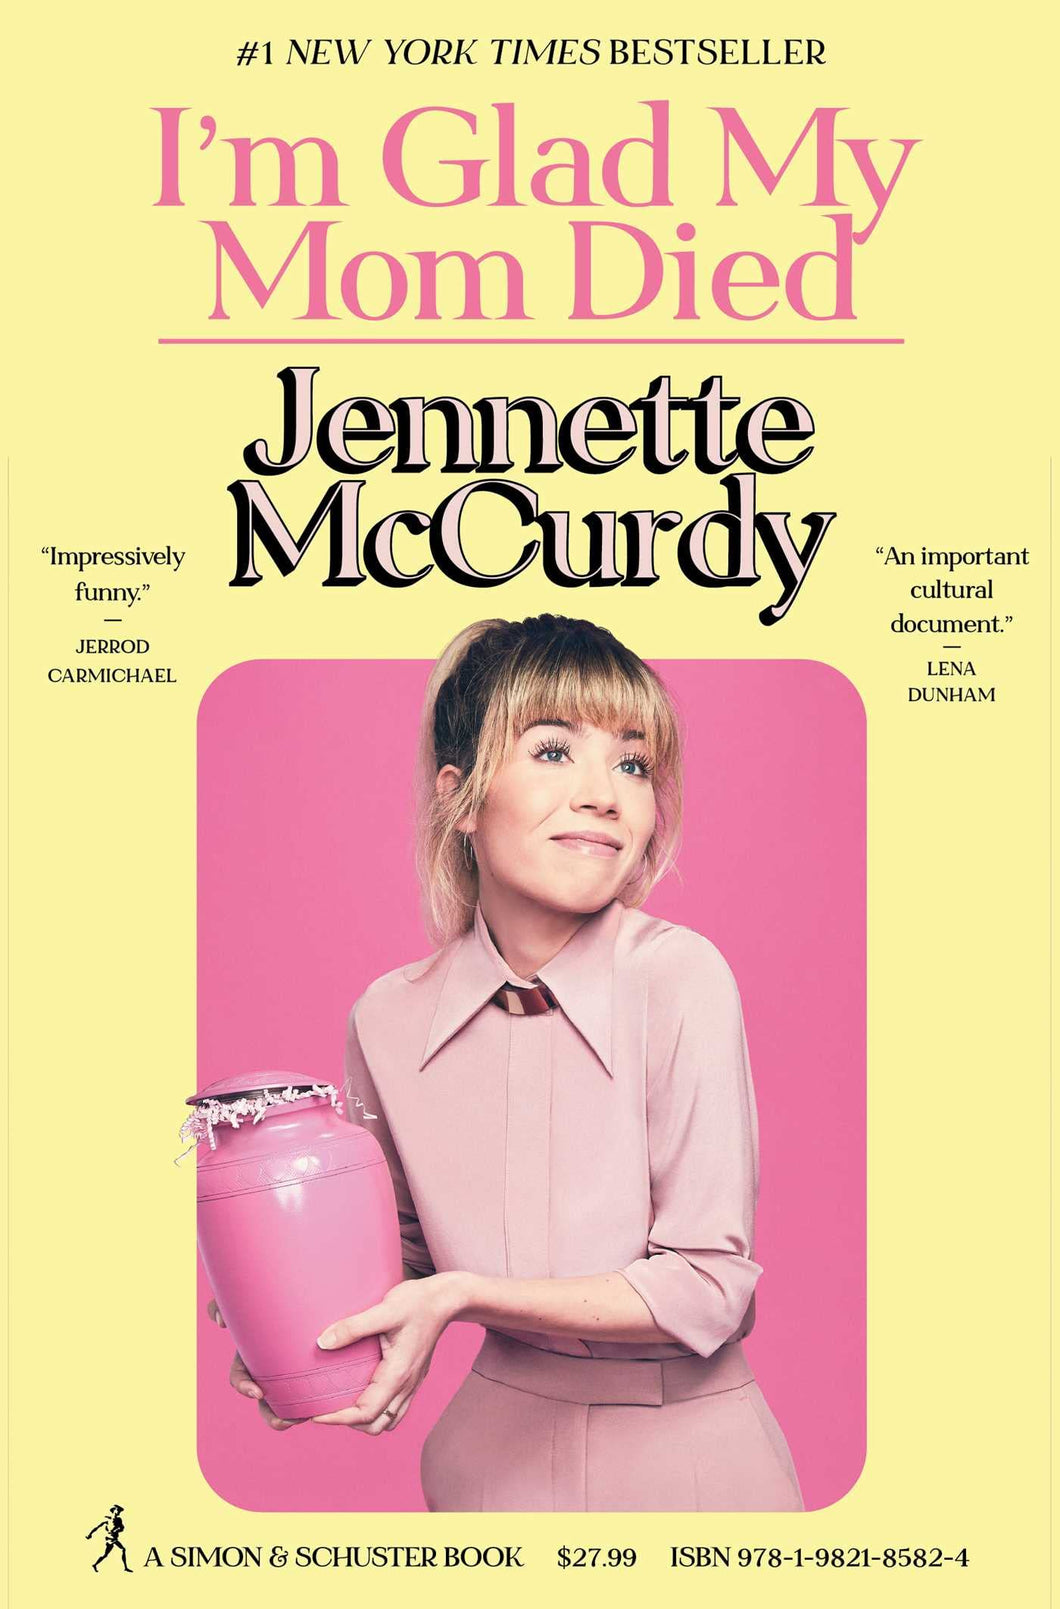 I'm Glad My Mom Died [Jennette McCurdy]